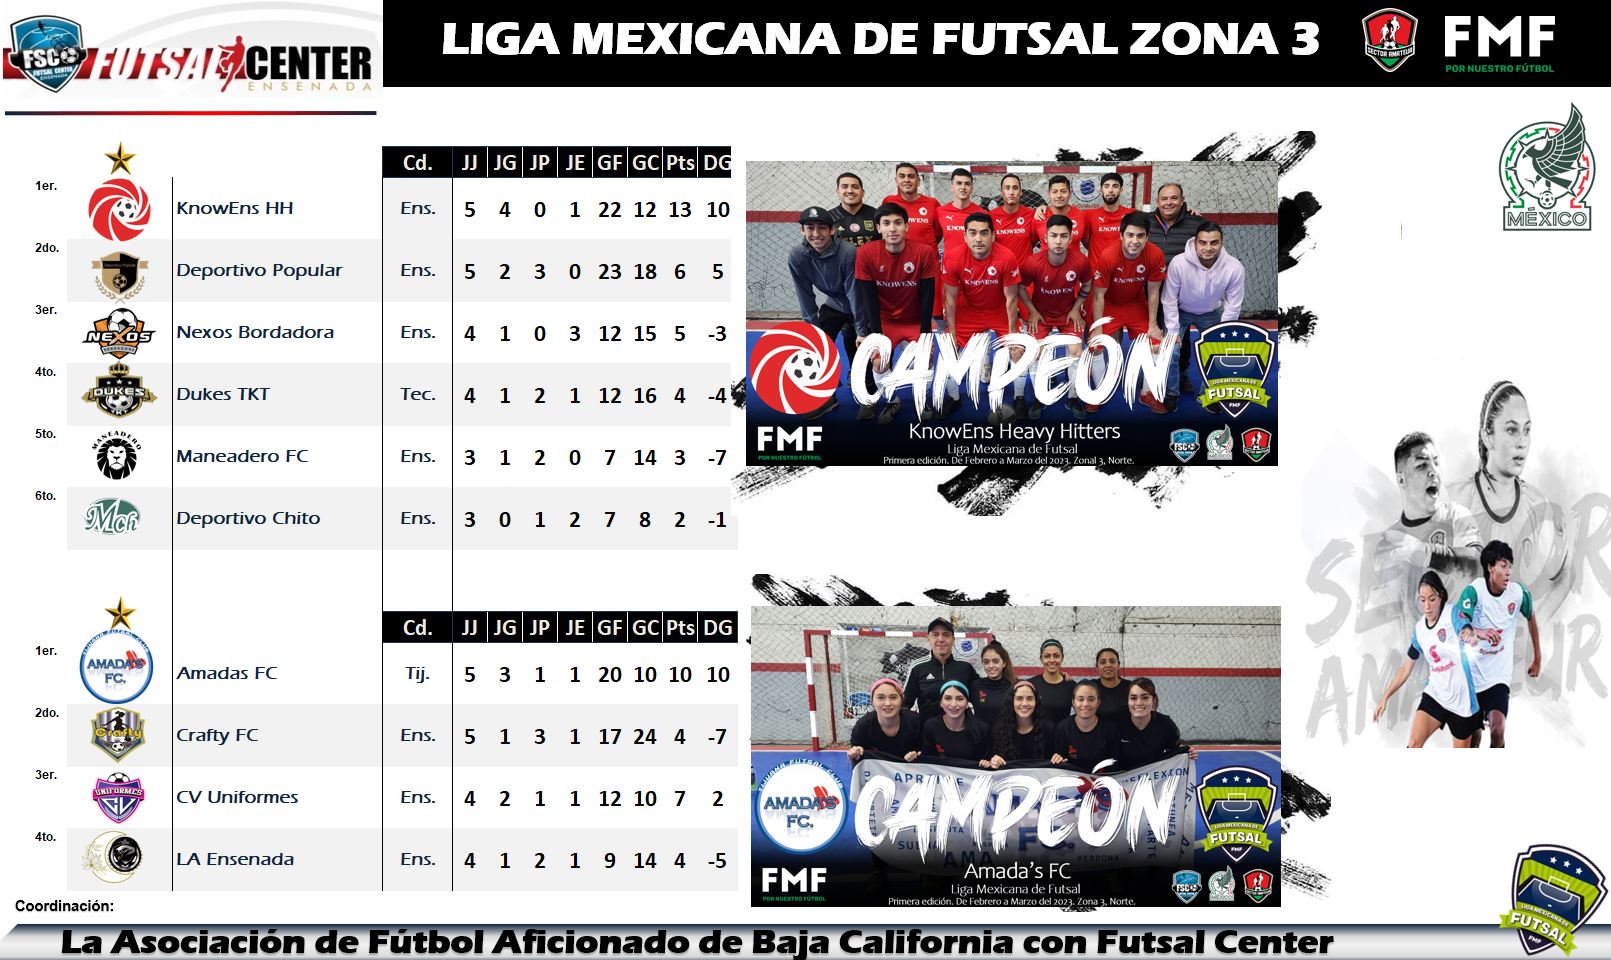 The Mexican Football Federation launched the first Mexican National Futsal League